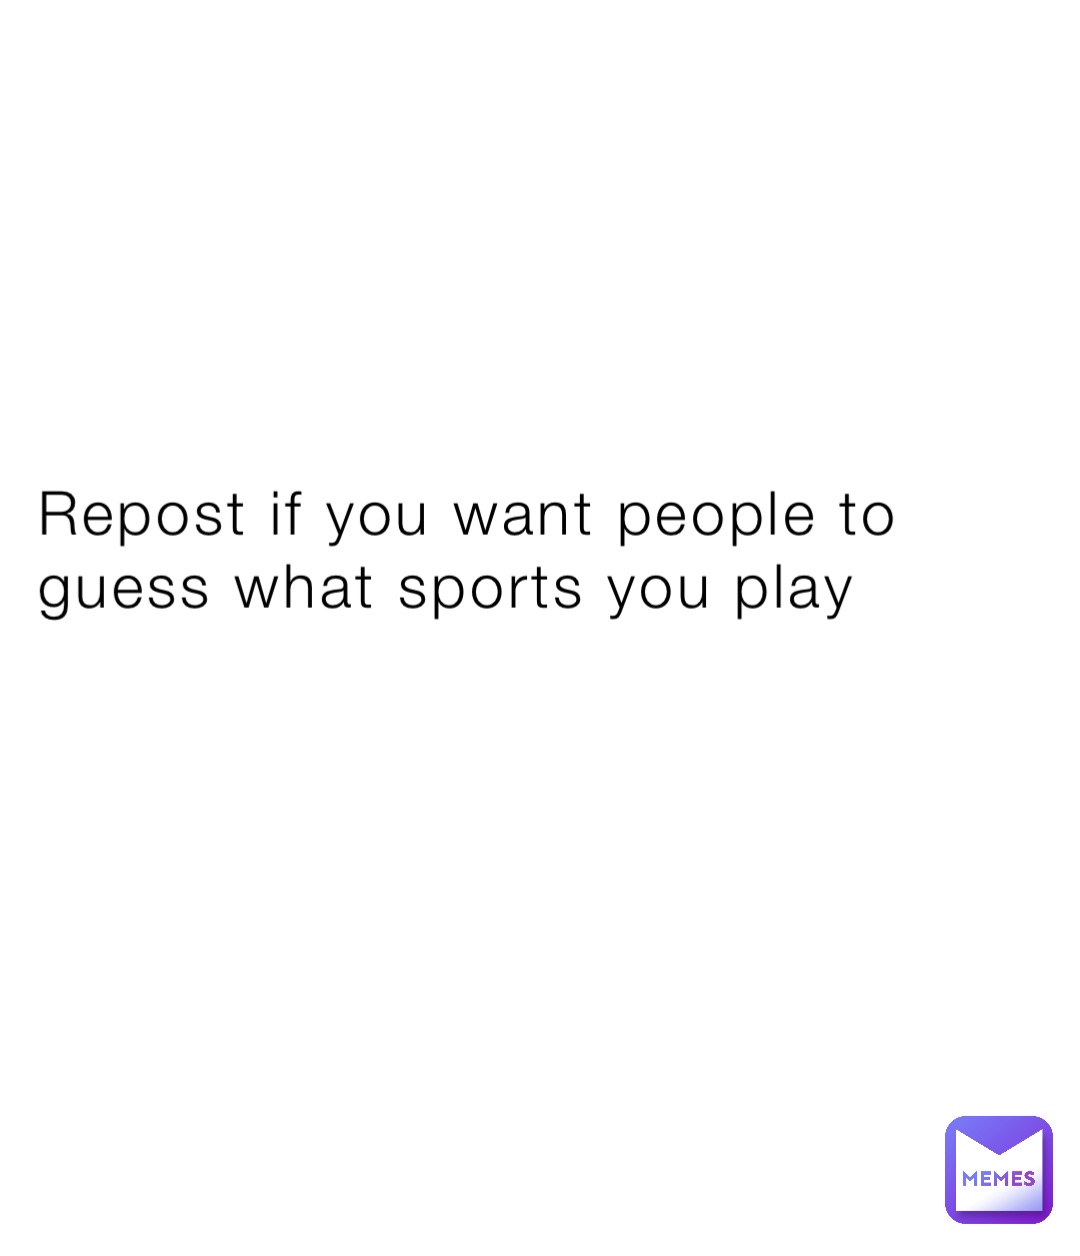 Repost if you want people to guess what sports you play